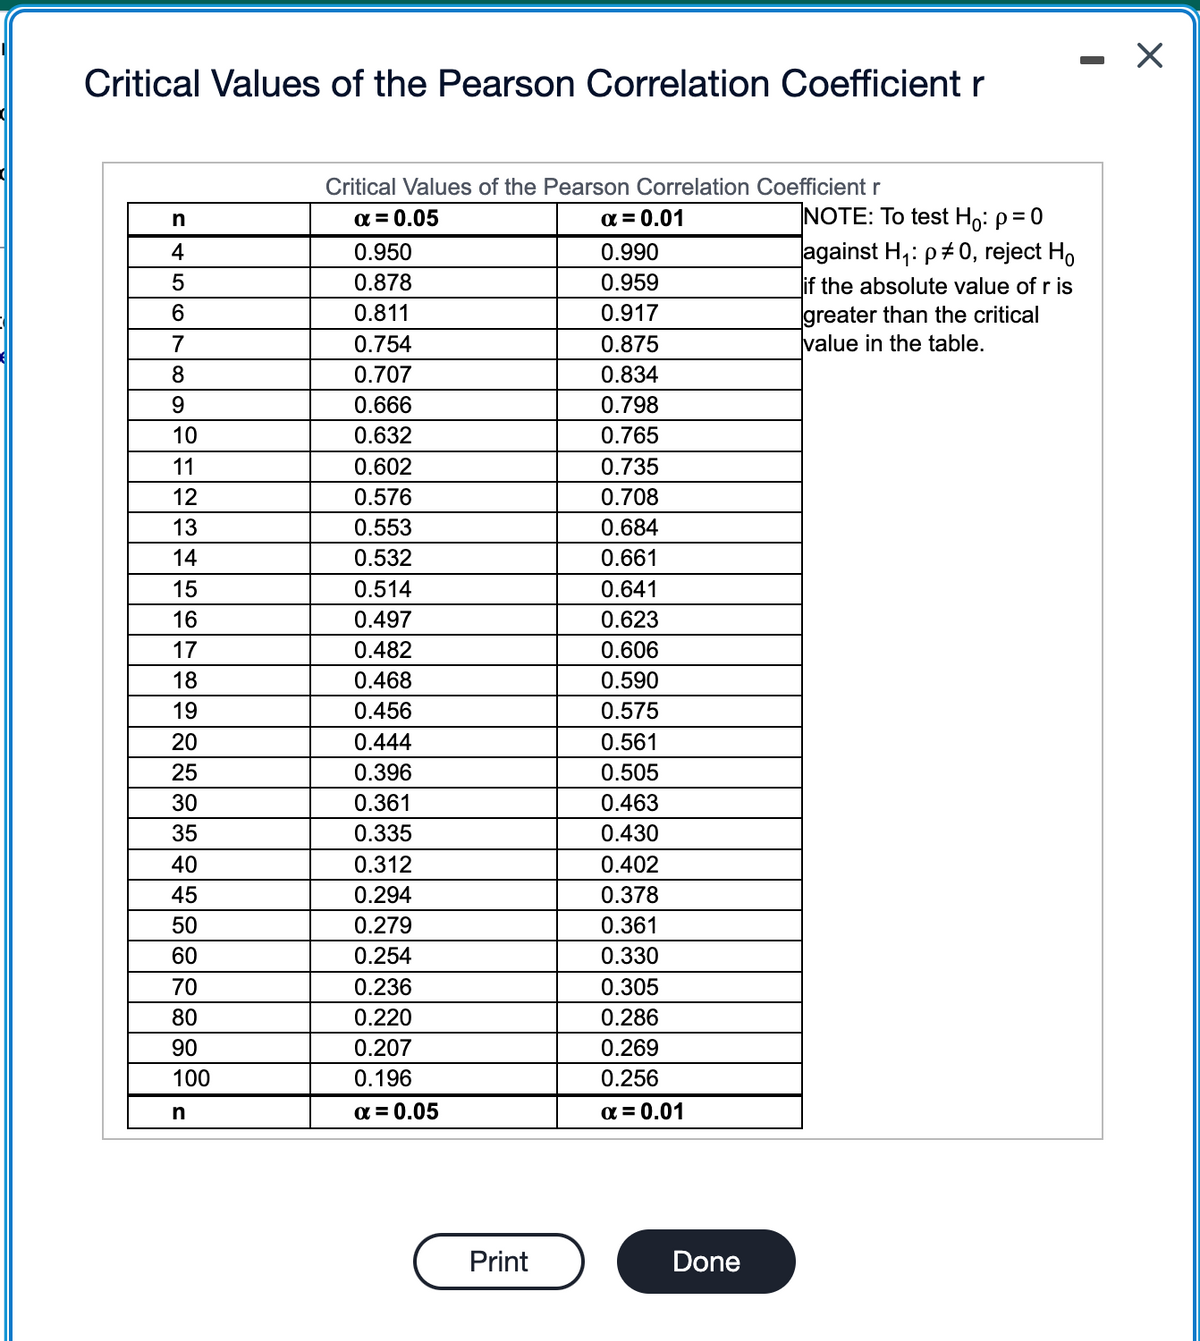 Critical Values of the Pearson Correlation Coefficient r
Critical Values of the Pearson Correlation Coefficientr
a = 0.05
x = 0.01
|NOTE: To test Ho: p= 0
against H,: p#0, reject Ho
if the absolute value of r is
greater than the critical
value in the table.
4
0.950
0.990
0.878
0.959
6.
0.811
0.917
7
0.754
0.875
8
0.707
0.834
9.
0.666
0.798
10
0.632
0.765
11
0.602
0.735
12
0.576
0.708
13
0.553
0.684
14
0.532
0.661
15
0.514
0.641
16
0.497
0.623
17
0.482
0.606
18
0.468
0.590
19
0.456
0.575
20
0.444
0.561
25
0.396
0.505
30
0.361
0.463
35
0.335
0.430
40
0.312
0.402
45
0.294
0.378
50
0.279
0.361
60
0.254
0.330
70
0.236
0.305
80
0.220
0.286
90
0.207
0.269
100
0.196
0.256
a = 0.05
a = 0.01
Print
Done
